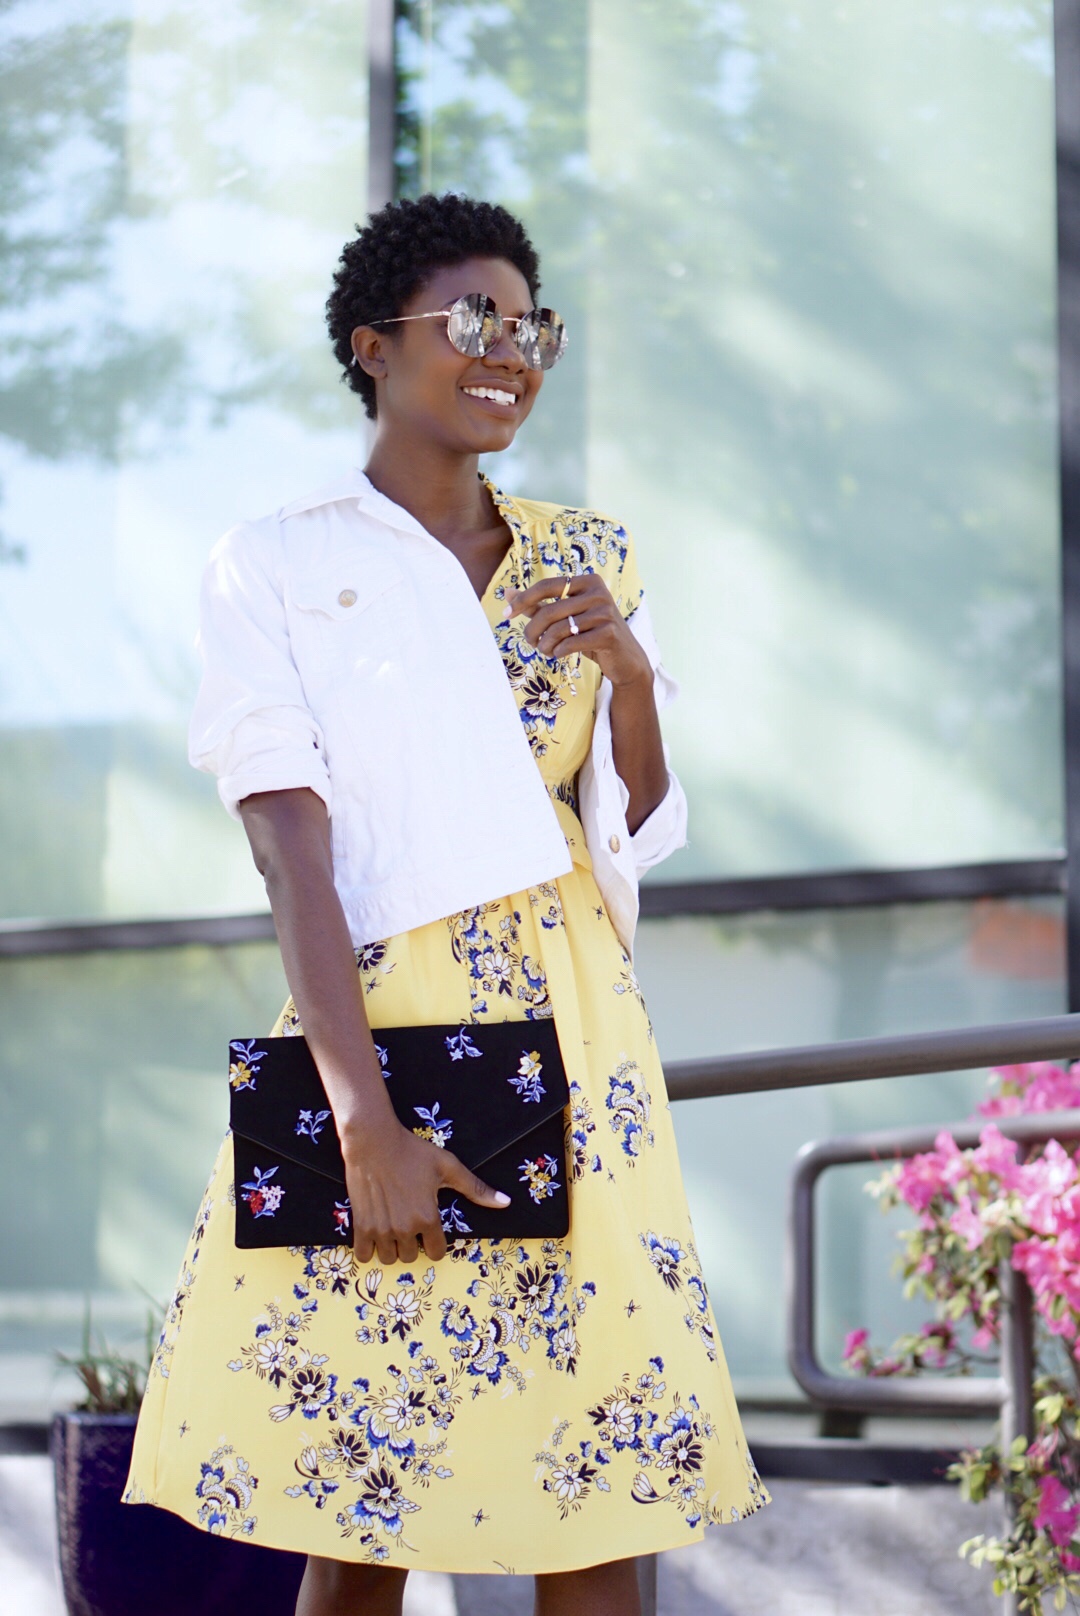 Ann taylor, boho floral midi dress, embroidered floral clutch, pink mules, twa, short natural hair